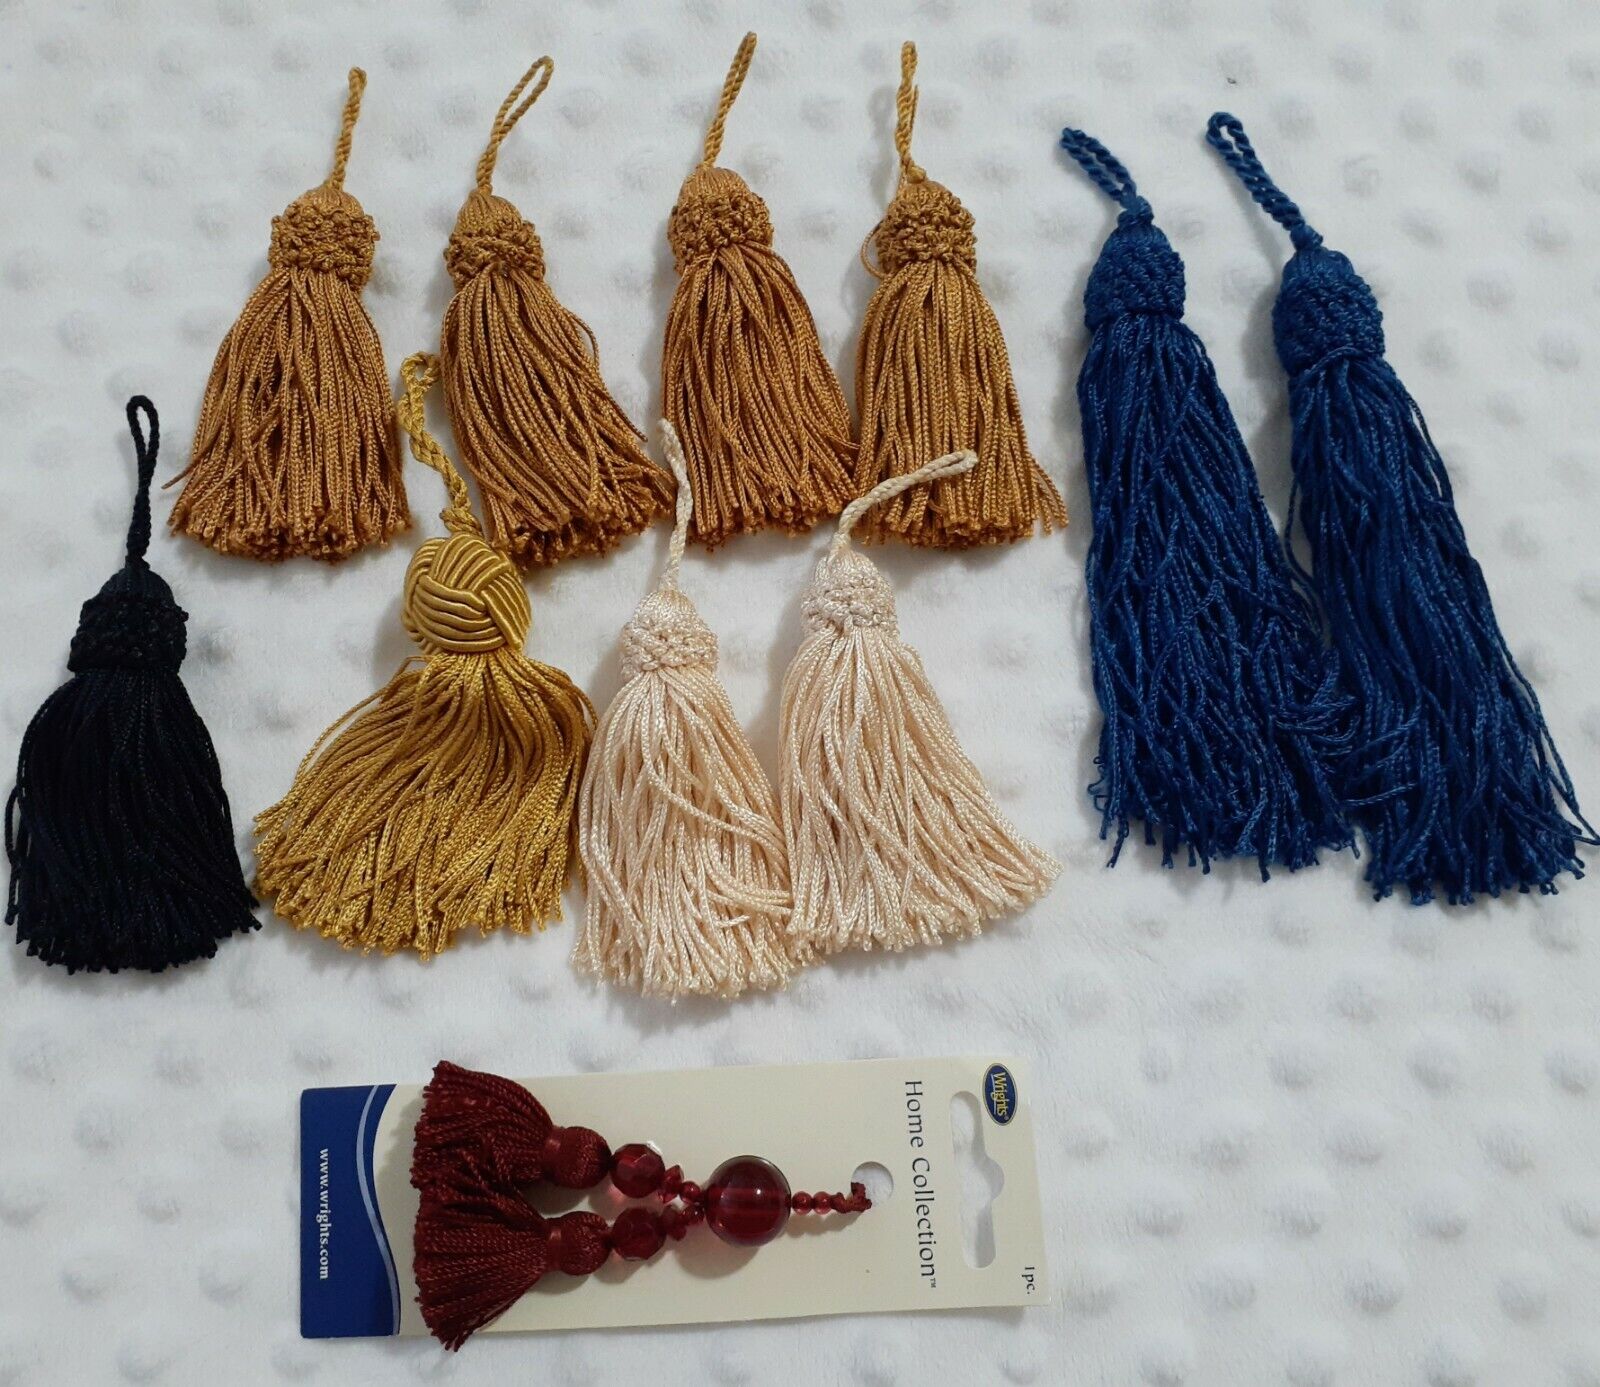 Lot of tassels 10 Conso Wright card Oklahoma City Mall Challenge the lowest price 1 vintage on